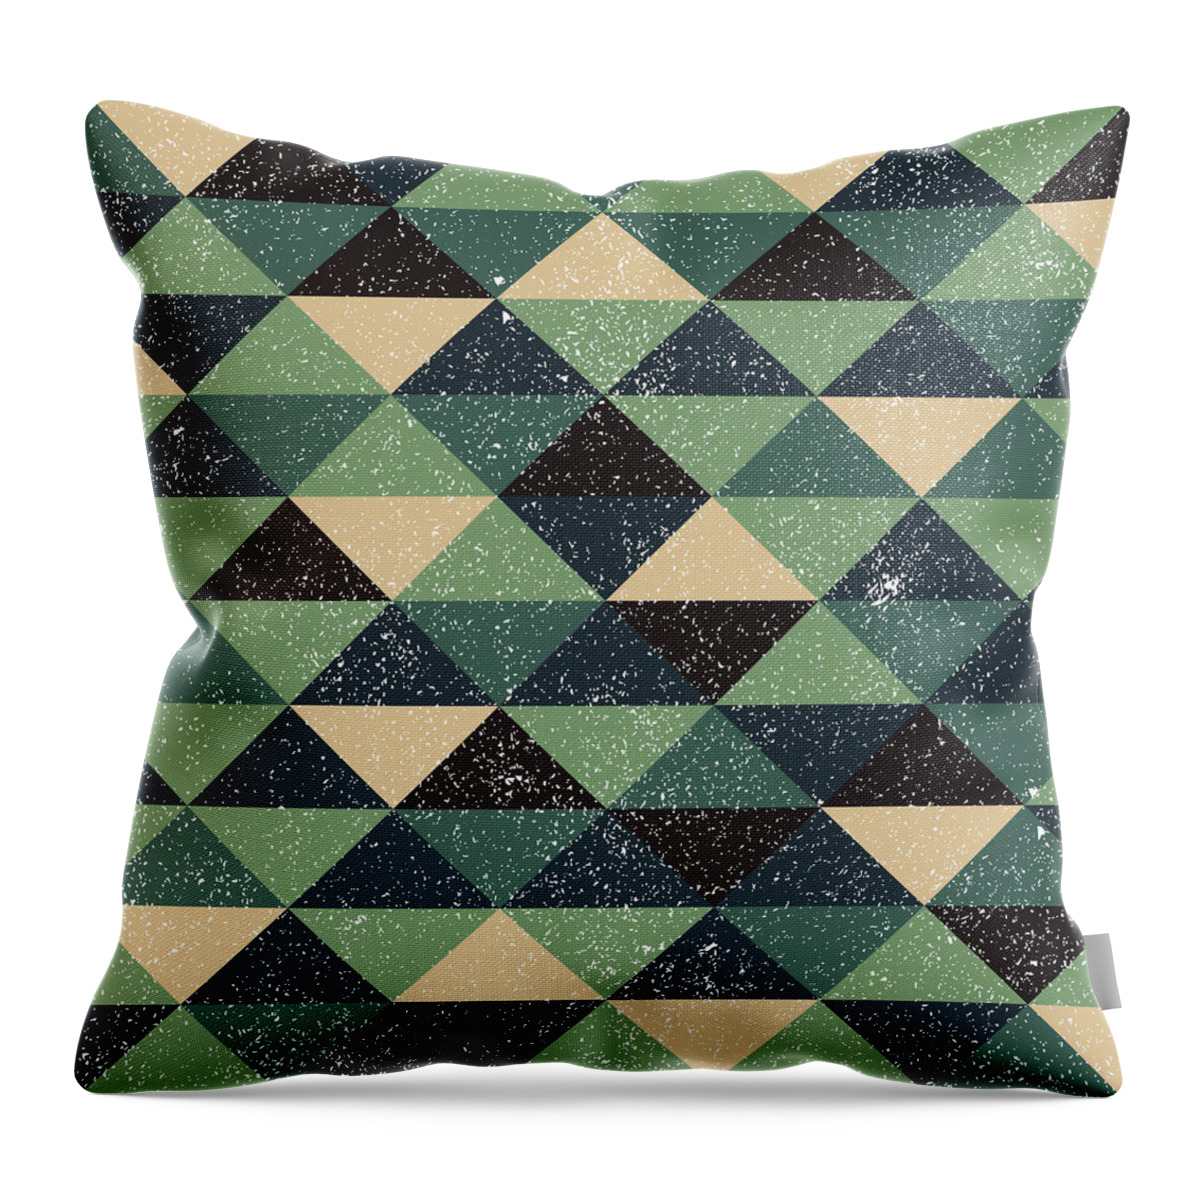 Pixel Throw Pillow featuring the digital art Pixel Art #146 by Mike Taylor